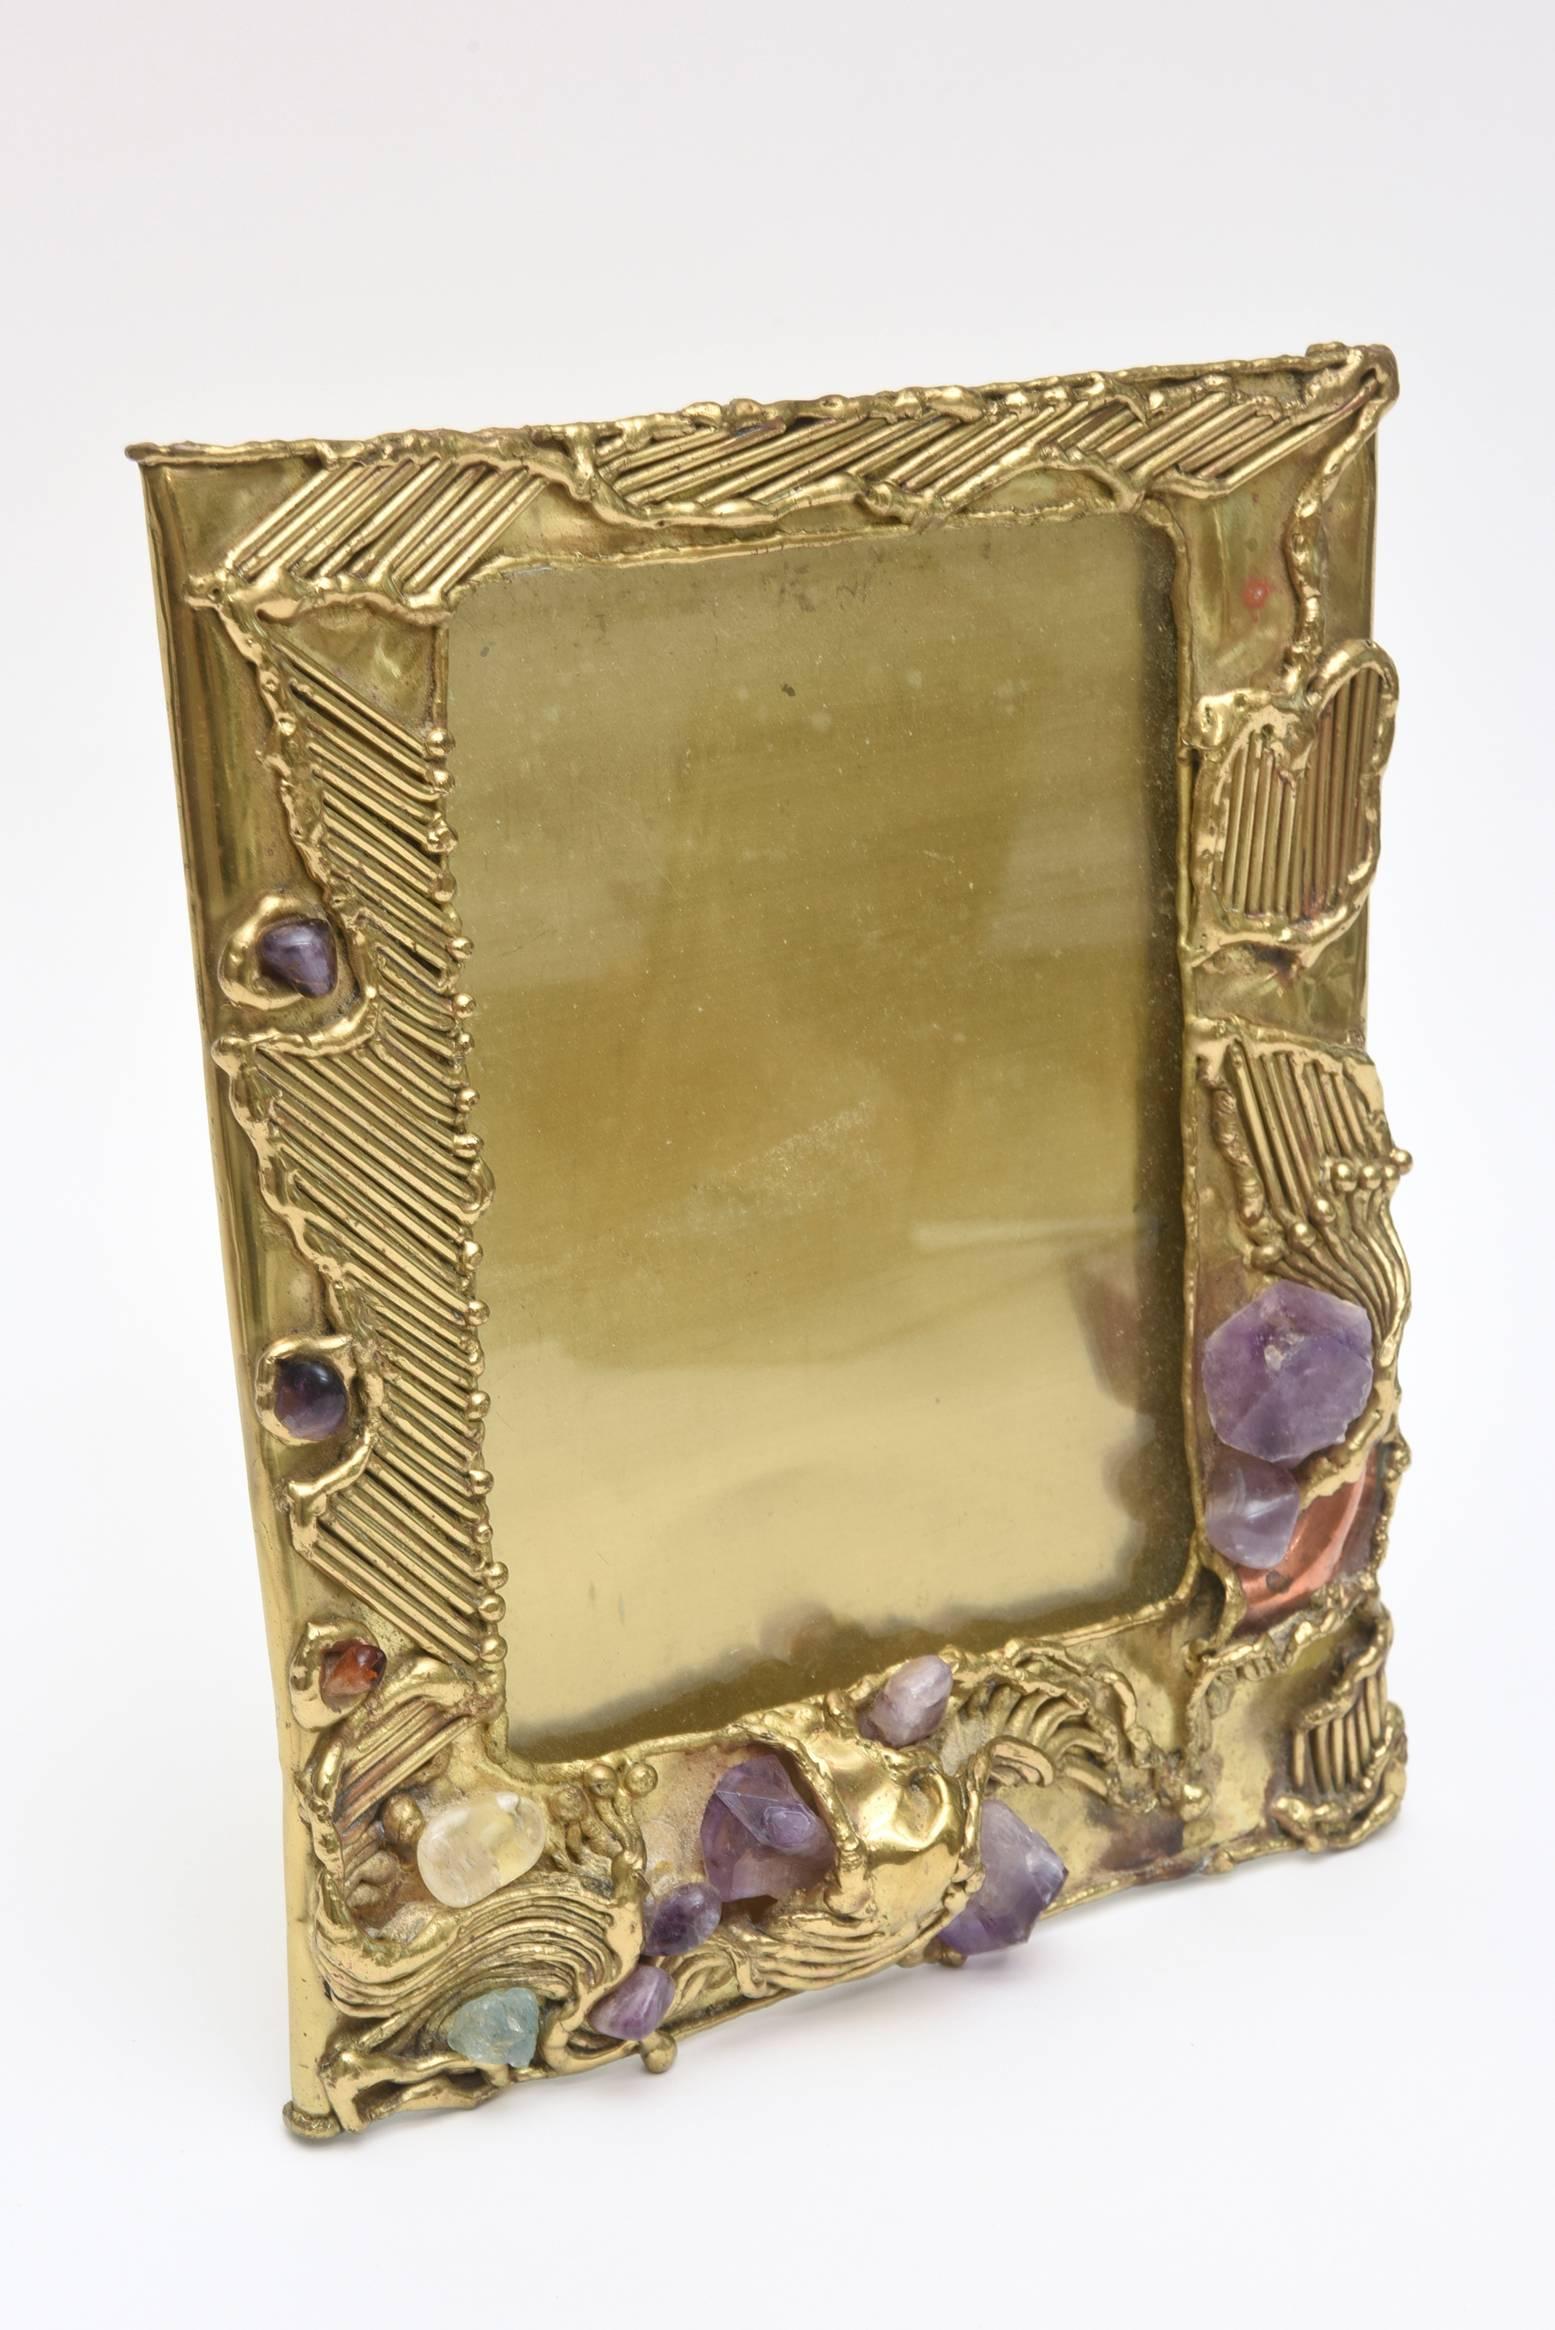 This studio one of a kind hand-wrought textural and dimensional picture frame is a mixed media of brass with inlays of copper hints.
The jeweled like frame/mirror has dimensional juttings of raw amethyst, rose quartz and agate. It is sculptural and